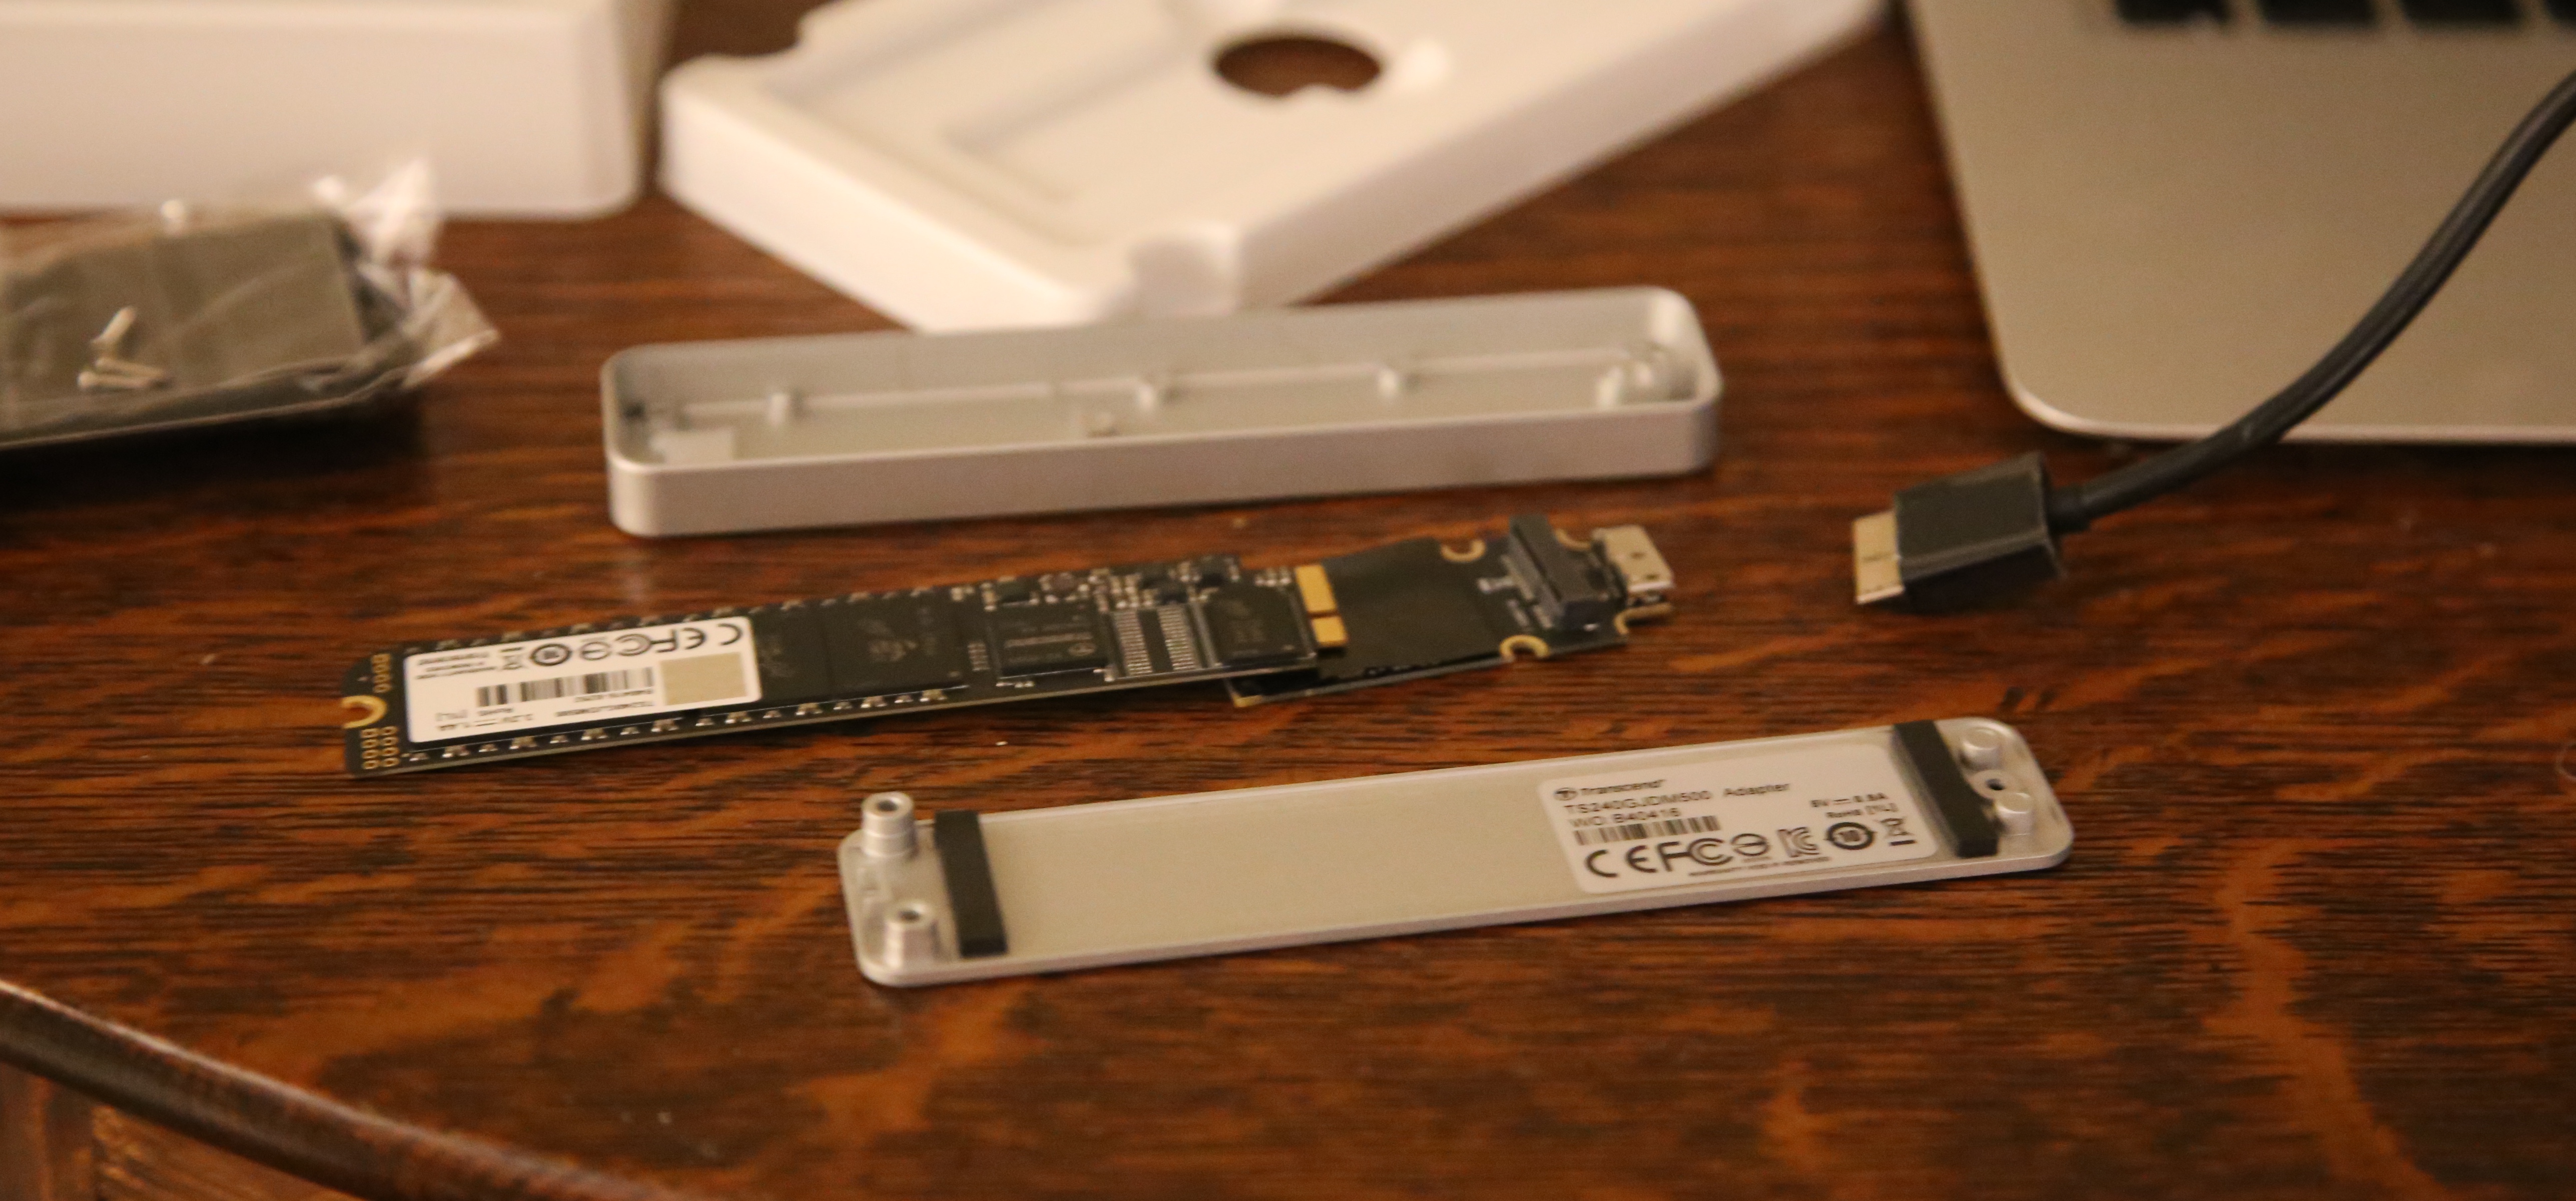 Review: Transcend's JetDrives add whopping 240-960GB SSD to